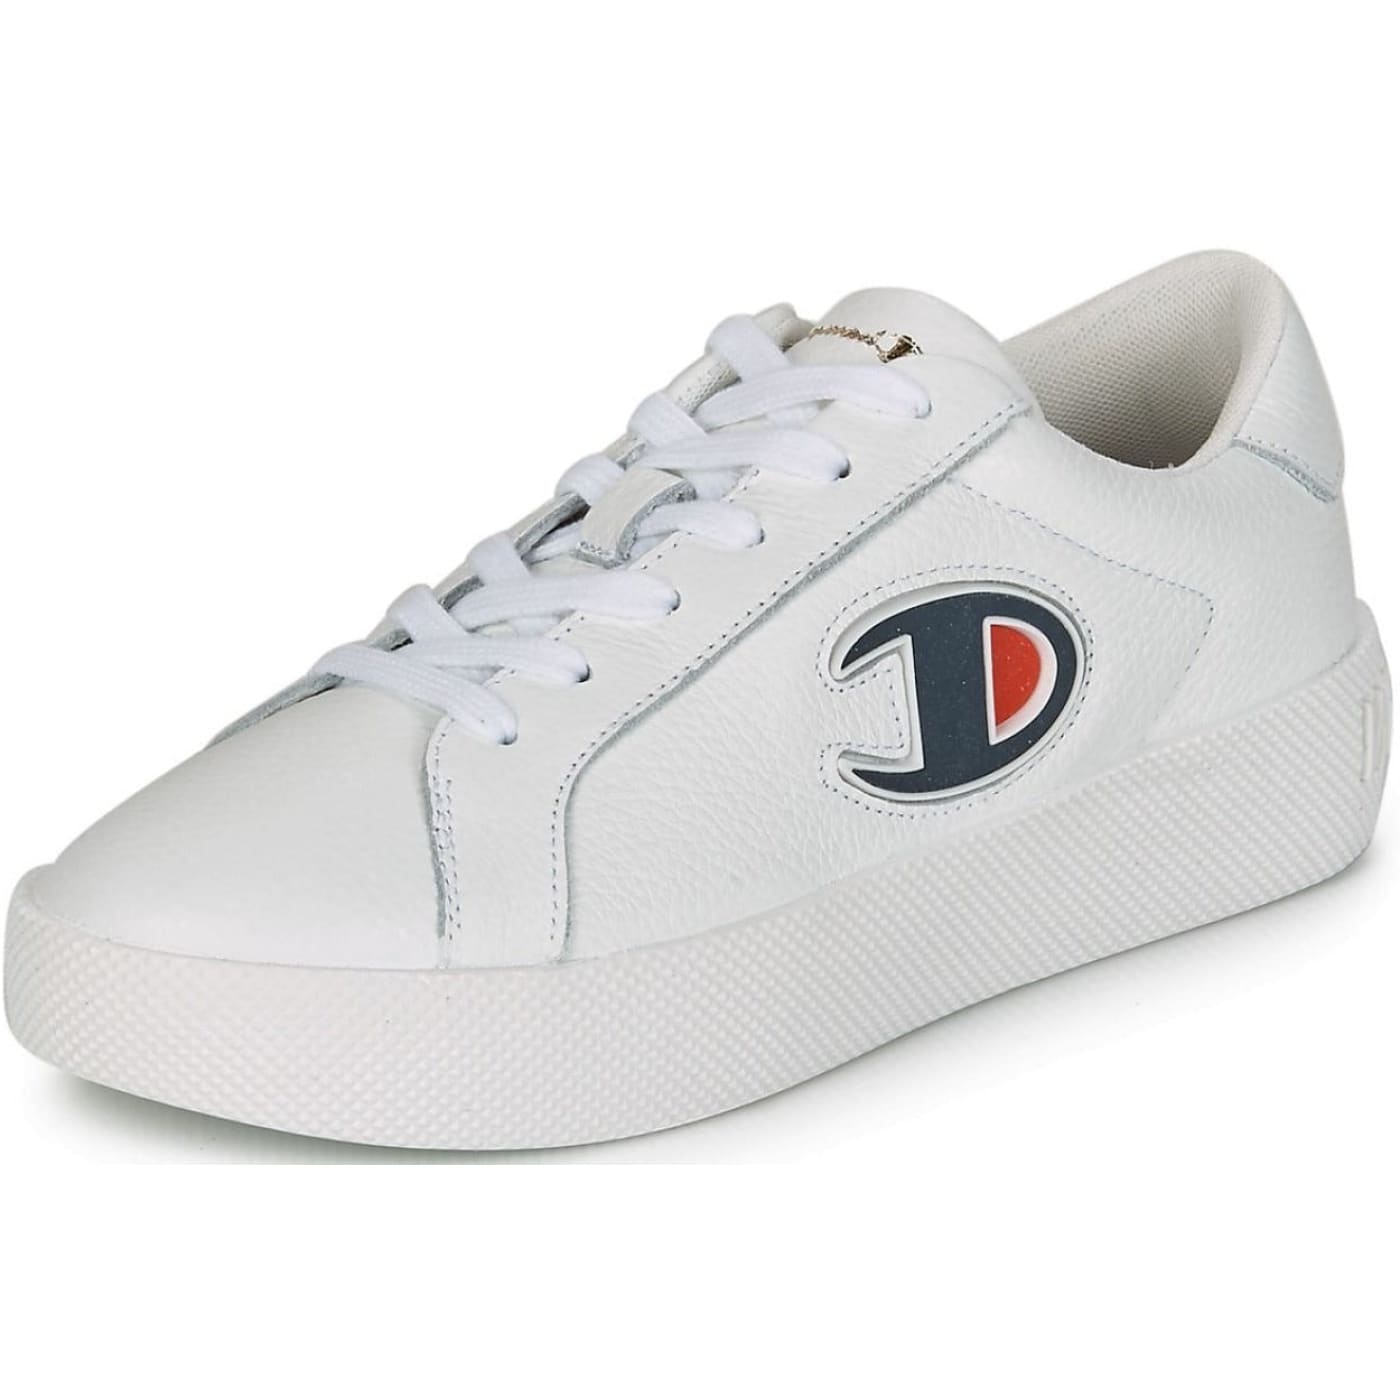 Champion Era White Womens Trainers Shoes – Top Brand Shoes